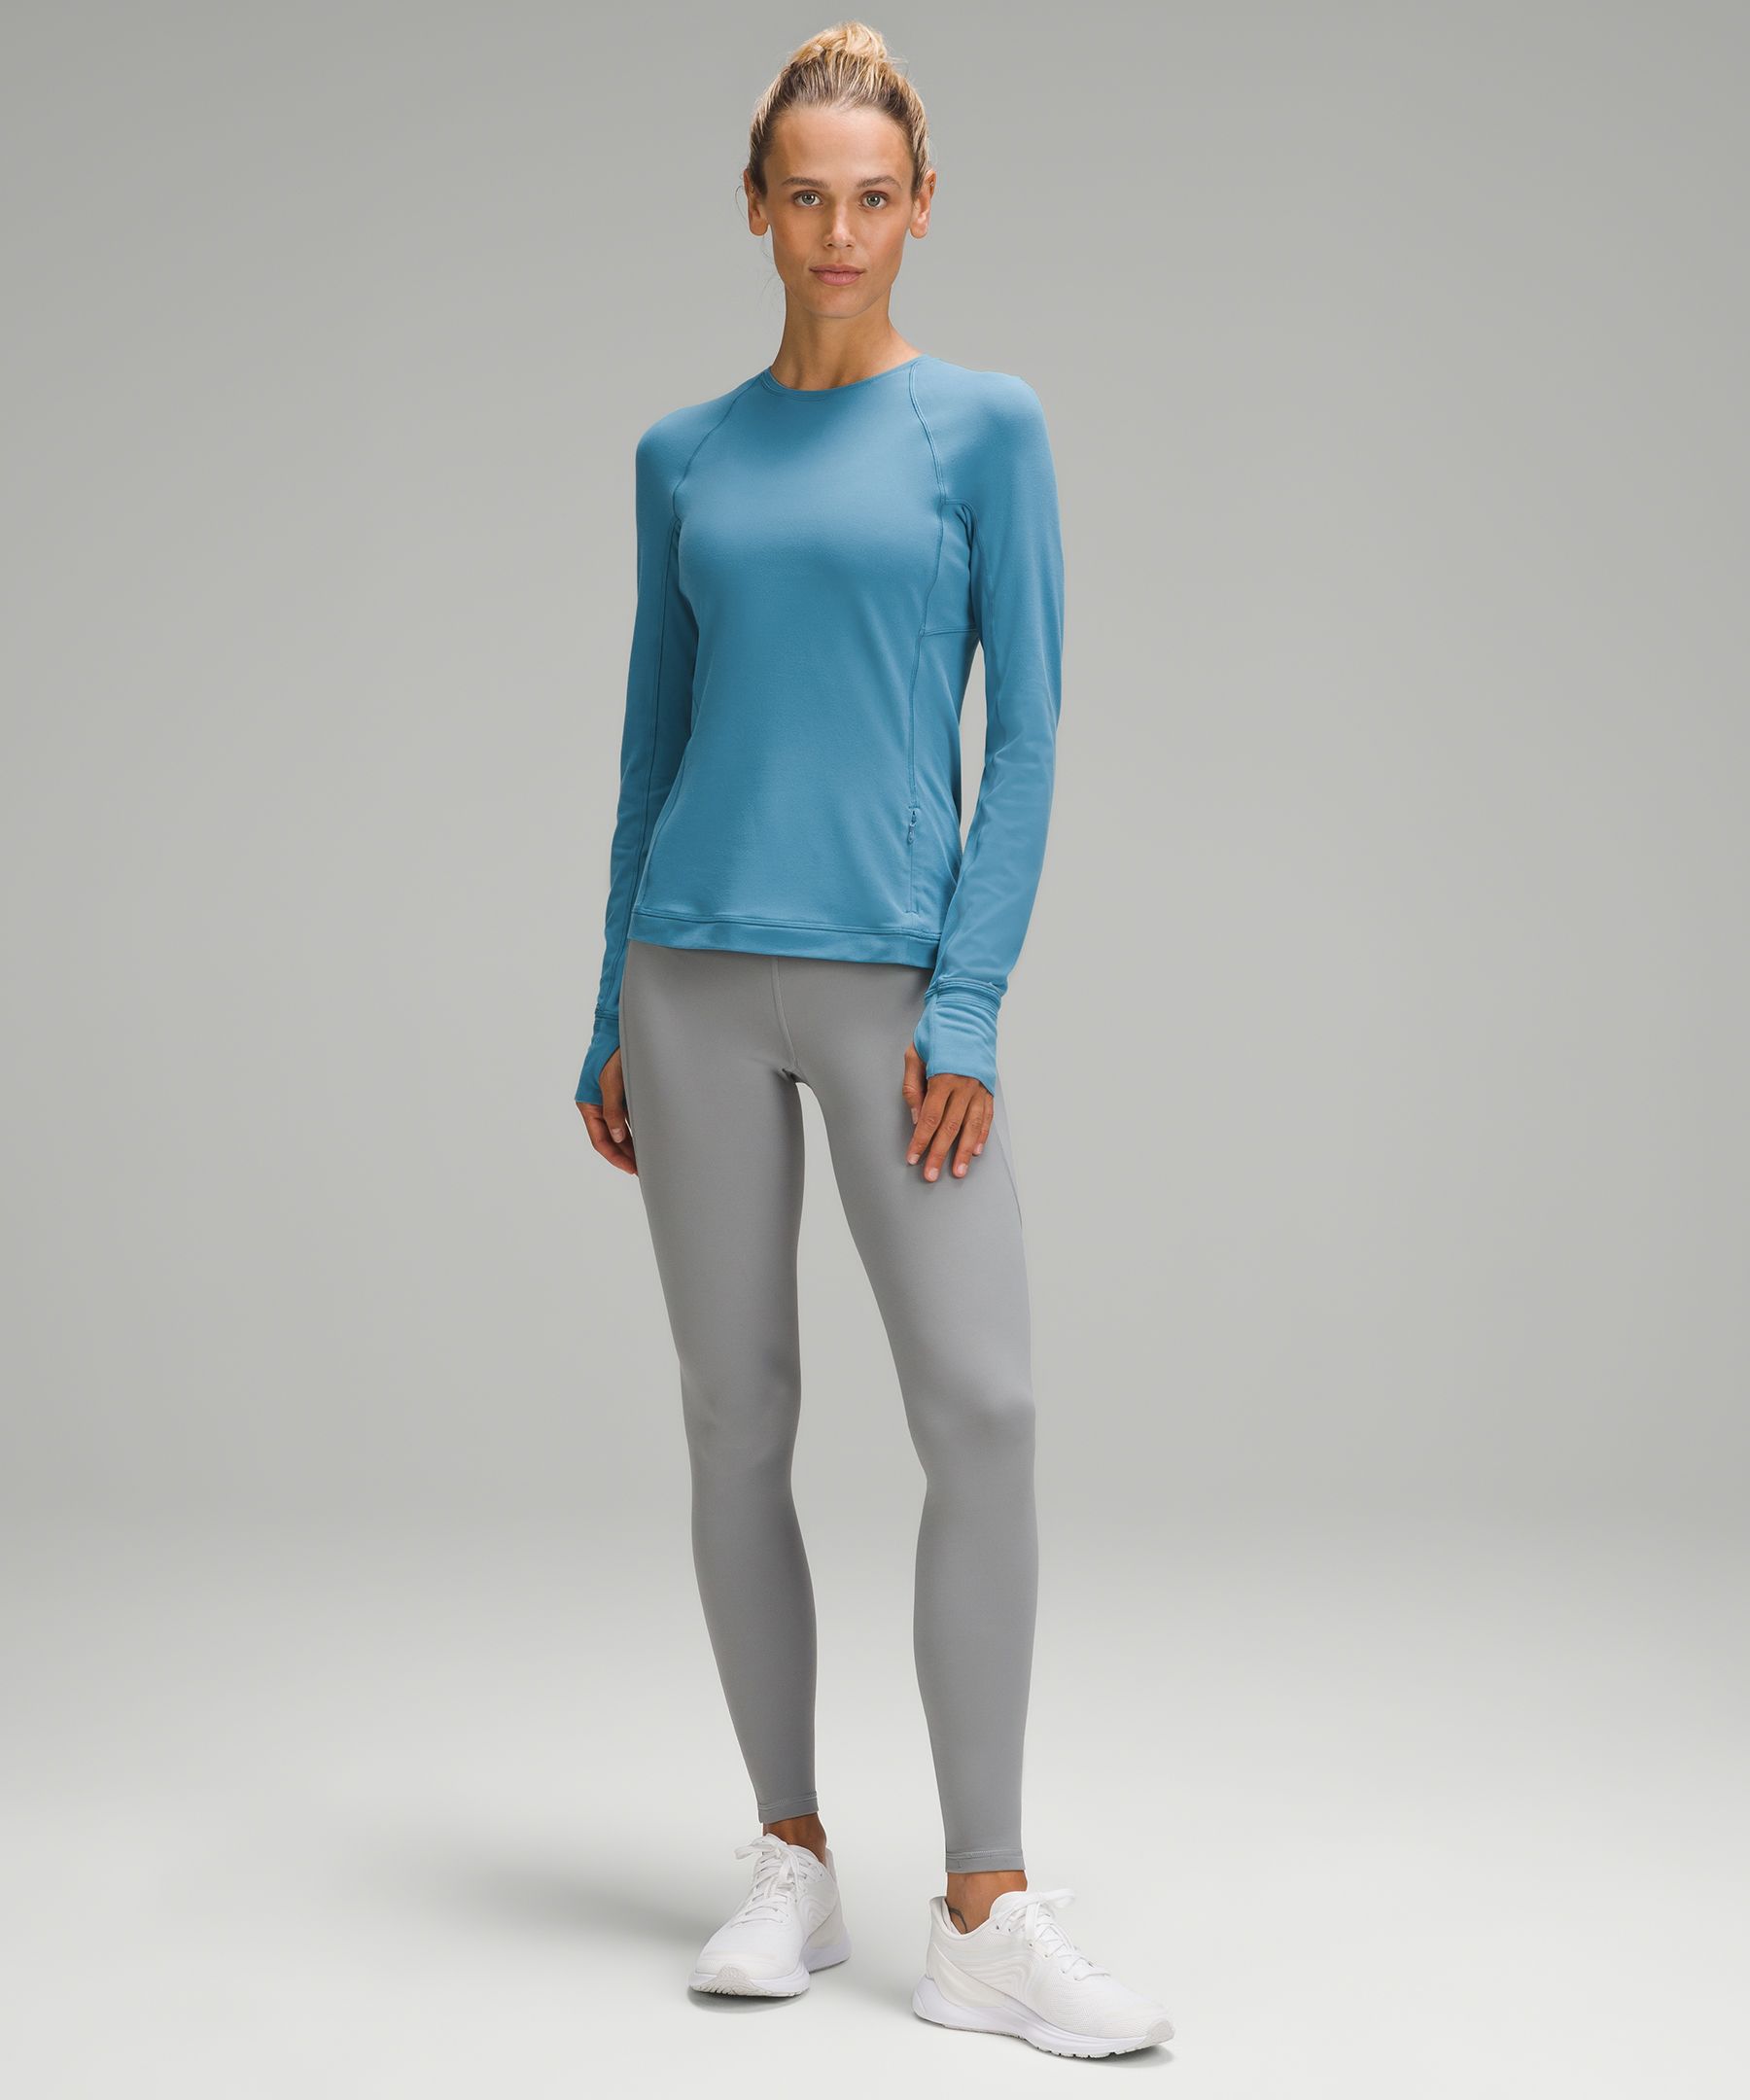 Fit pics and review: It's Rulu Run LS and ETS Long Sleeve : r/lululemon